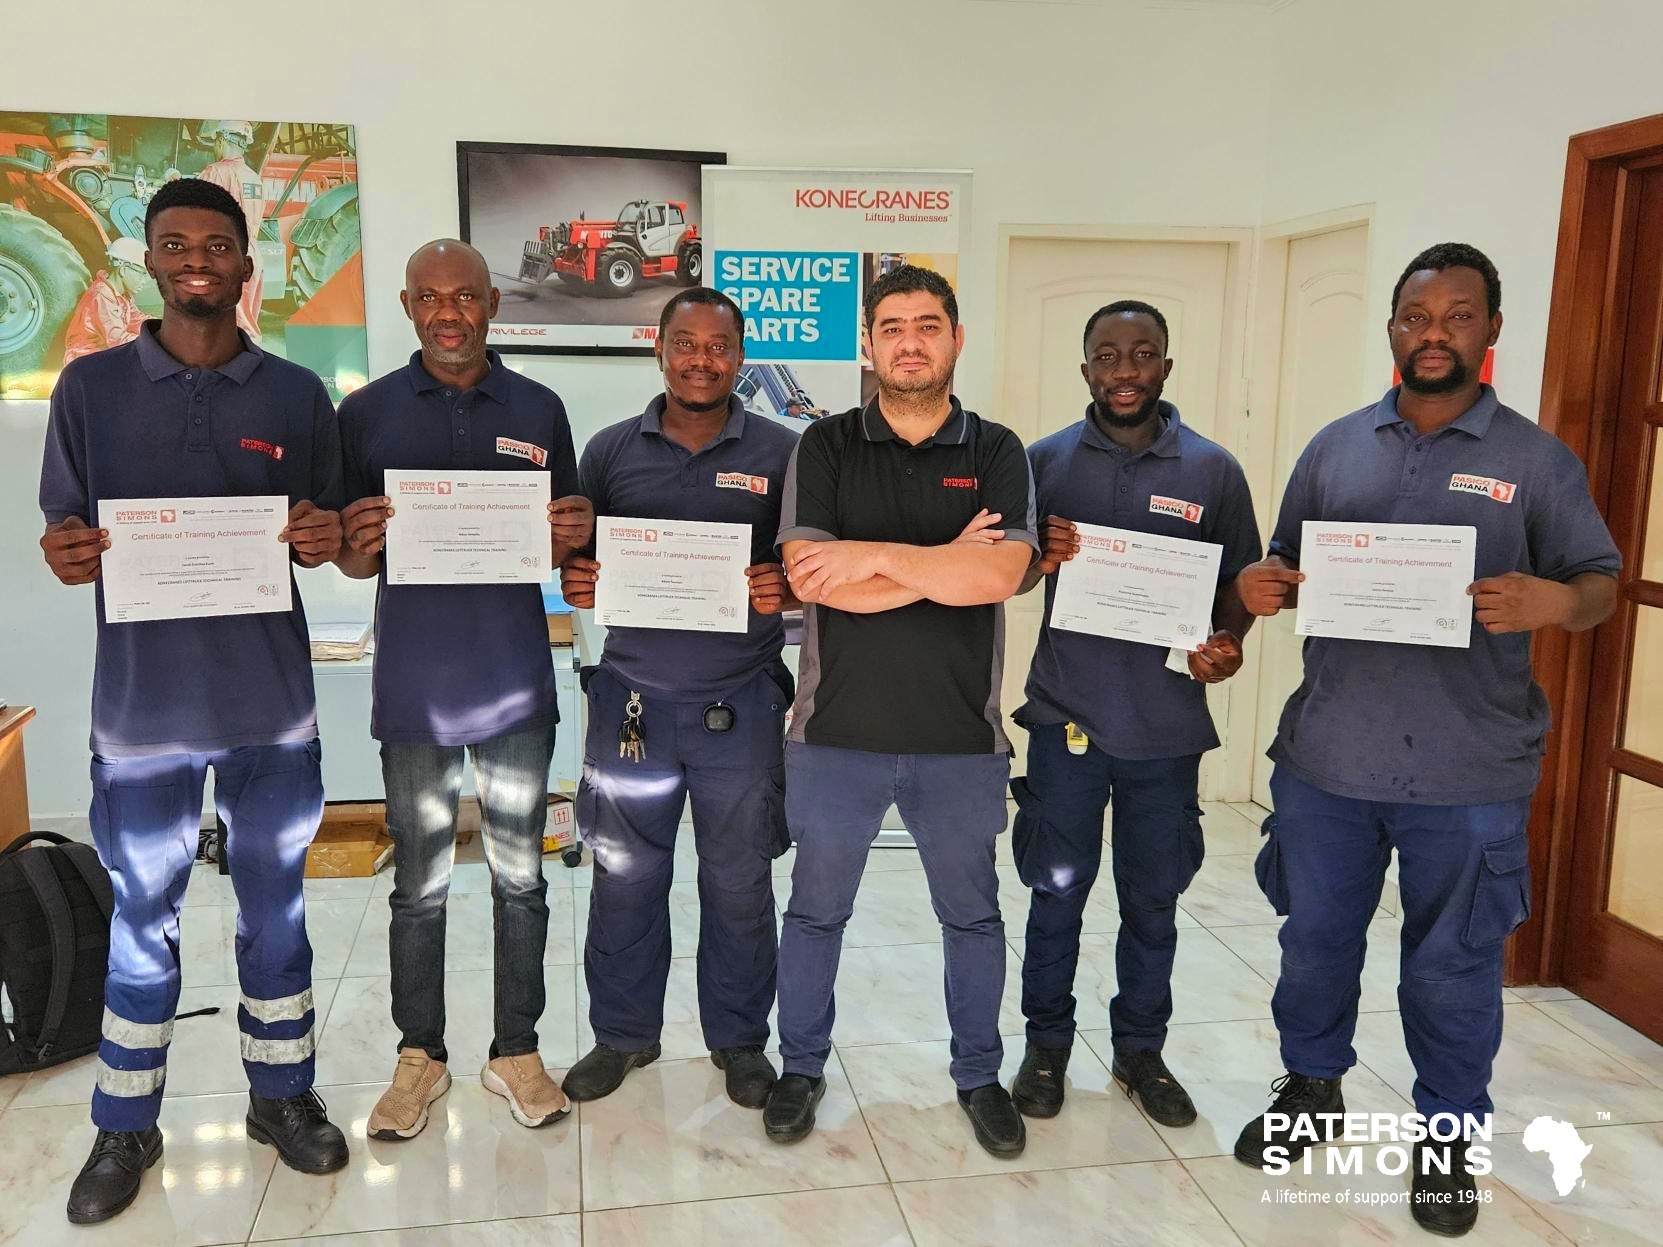 PATERSON SIMONS CONDUCTS TECHNICAL TRAINING FOR OUR TEMA BASED KONECRANES LIFTTRUCKS SPECIALIST ENGINEERS, IN GHANA